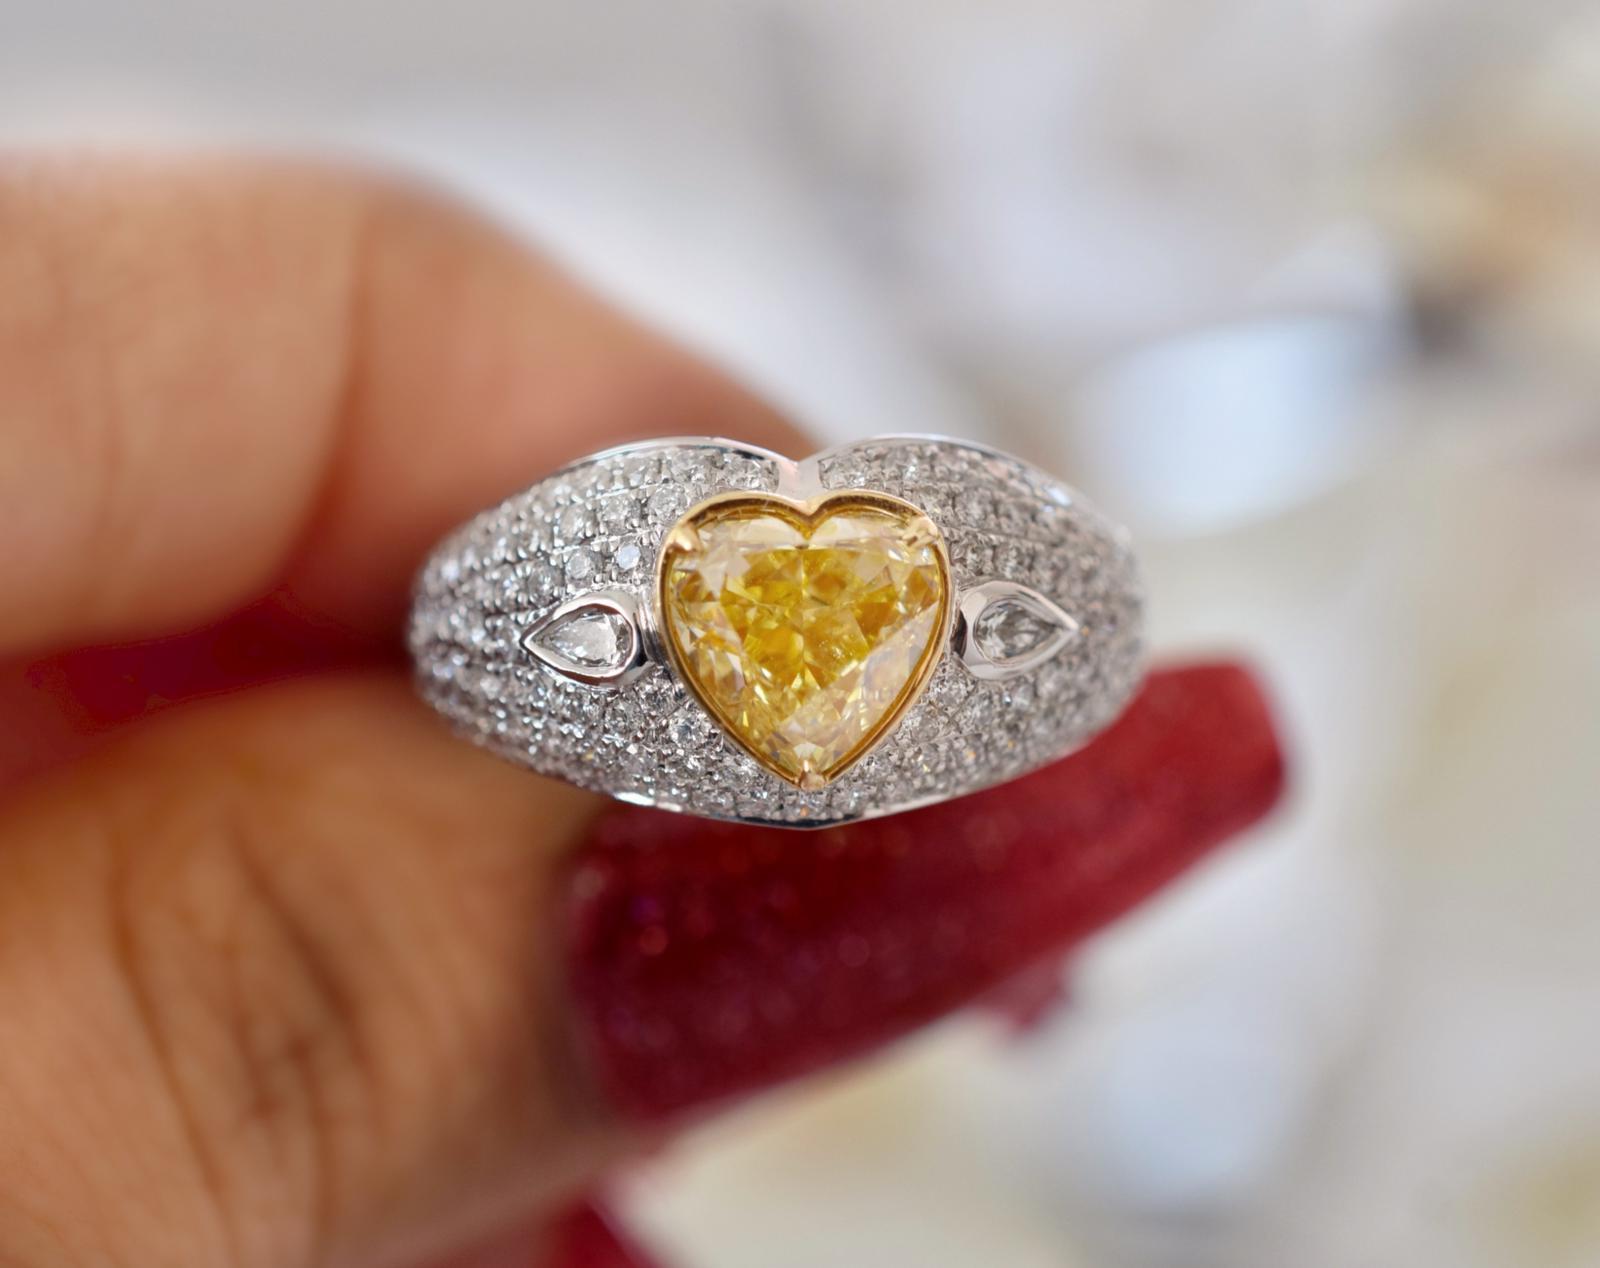 **100% NATURAL FANCY COLOUR DIAMOND JEWELLERY**

✪ Jewellery Details ✪

♦ MAIN STONE DETAILS

➛ Stone Shape: Heart
➛ Stone Color: Fancy Light Yellow
➛ Stone Weight: 2.01 carats
➛ Clarity: VS1
➛ GIA certified

♦ SIDE STONE DETAILS

➛ Side White